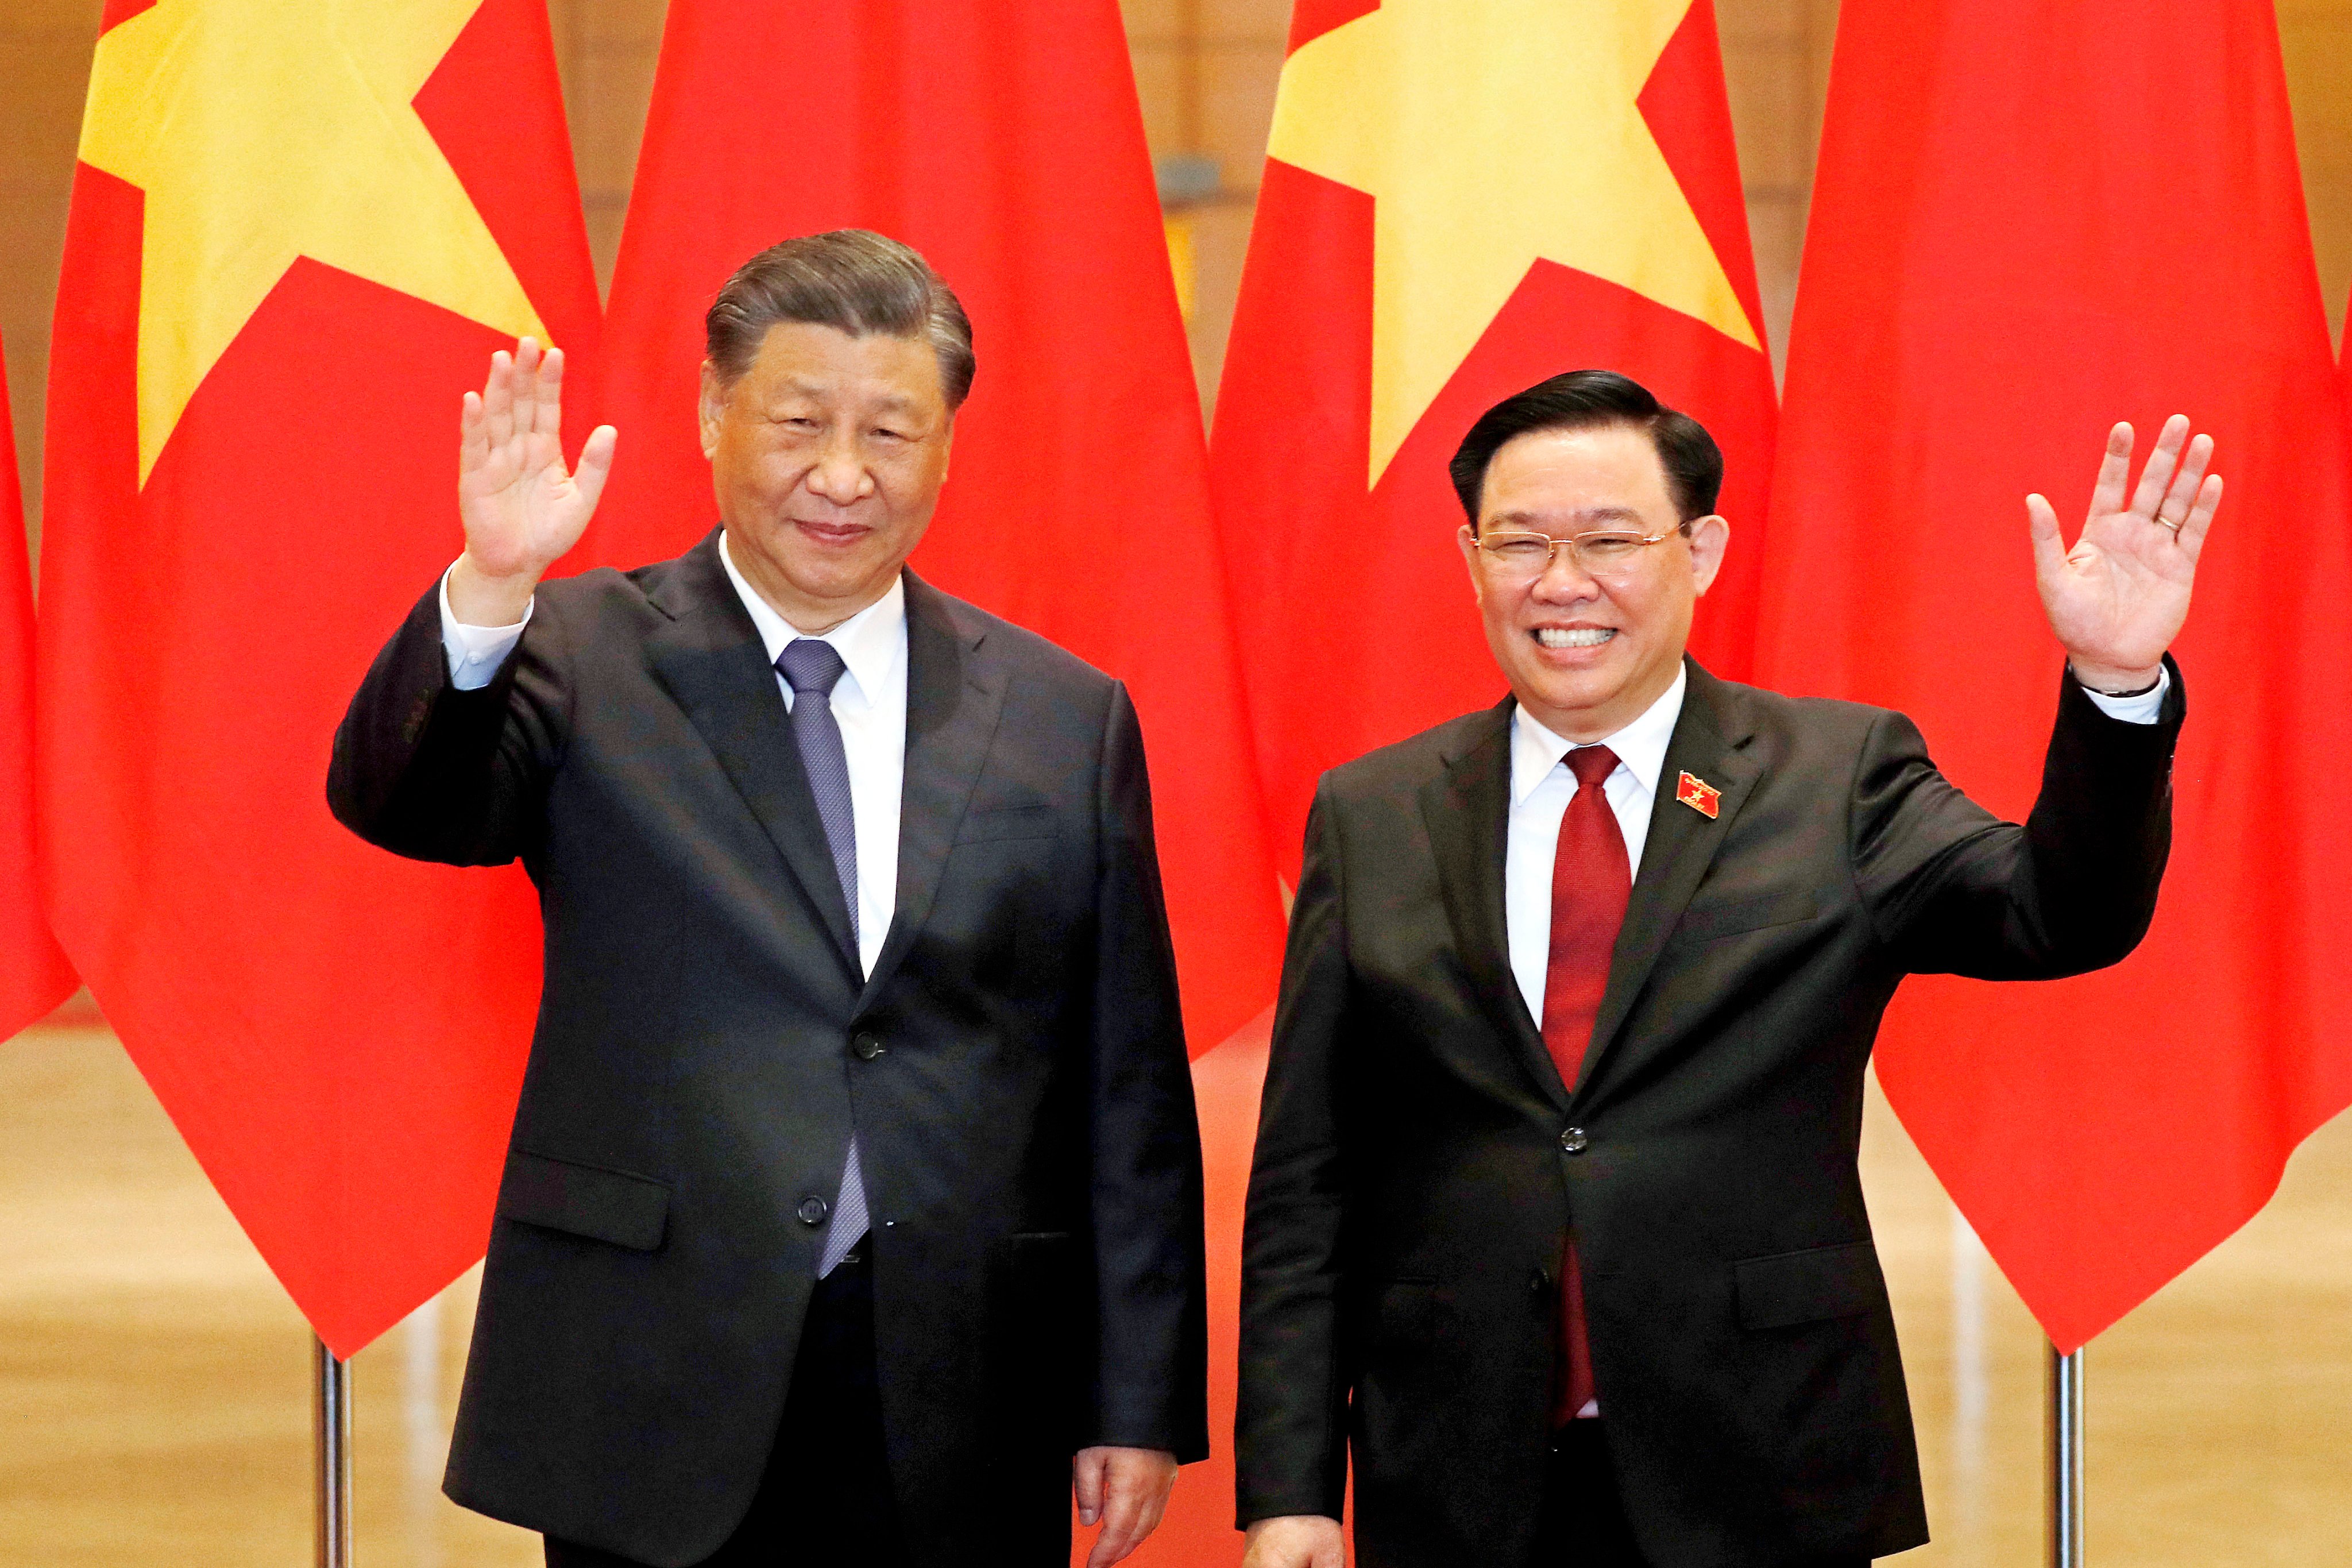 Chinese President Xi Jinping (left) and Vuong Dinh Hue, chairman of the National Assembly of Vietnam, in Hanoi in December, when the two countries agreed to build a “community with a shared future”. Photo: AFP